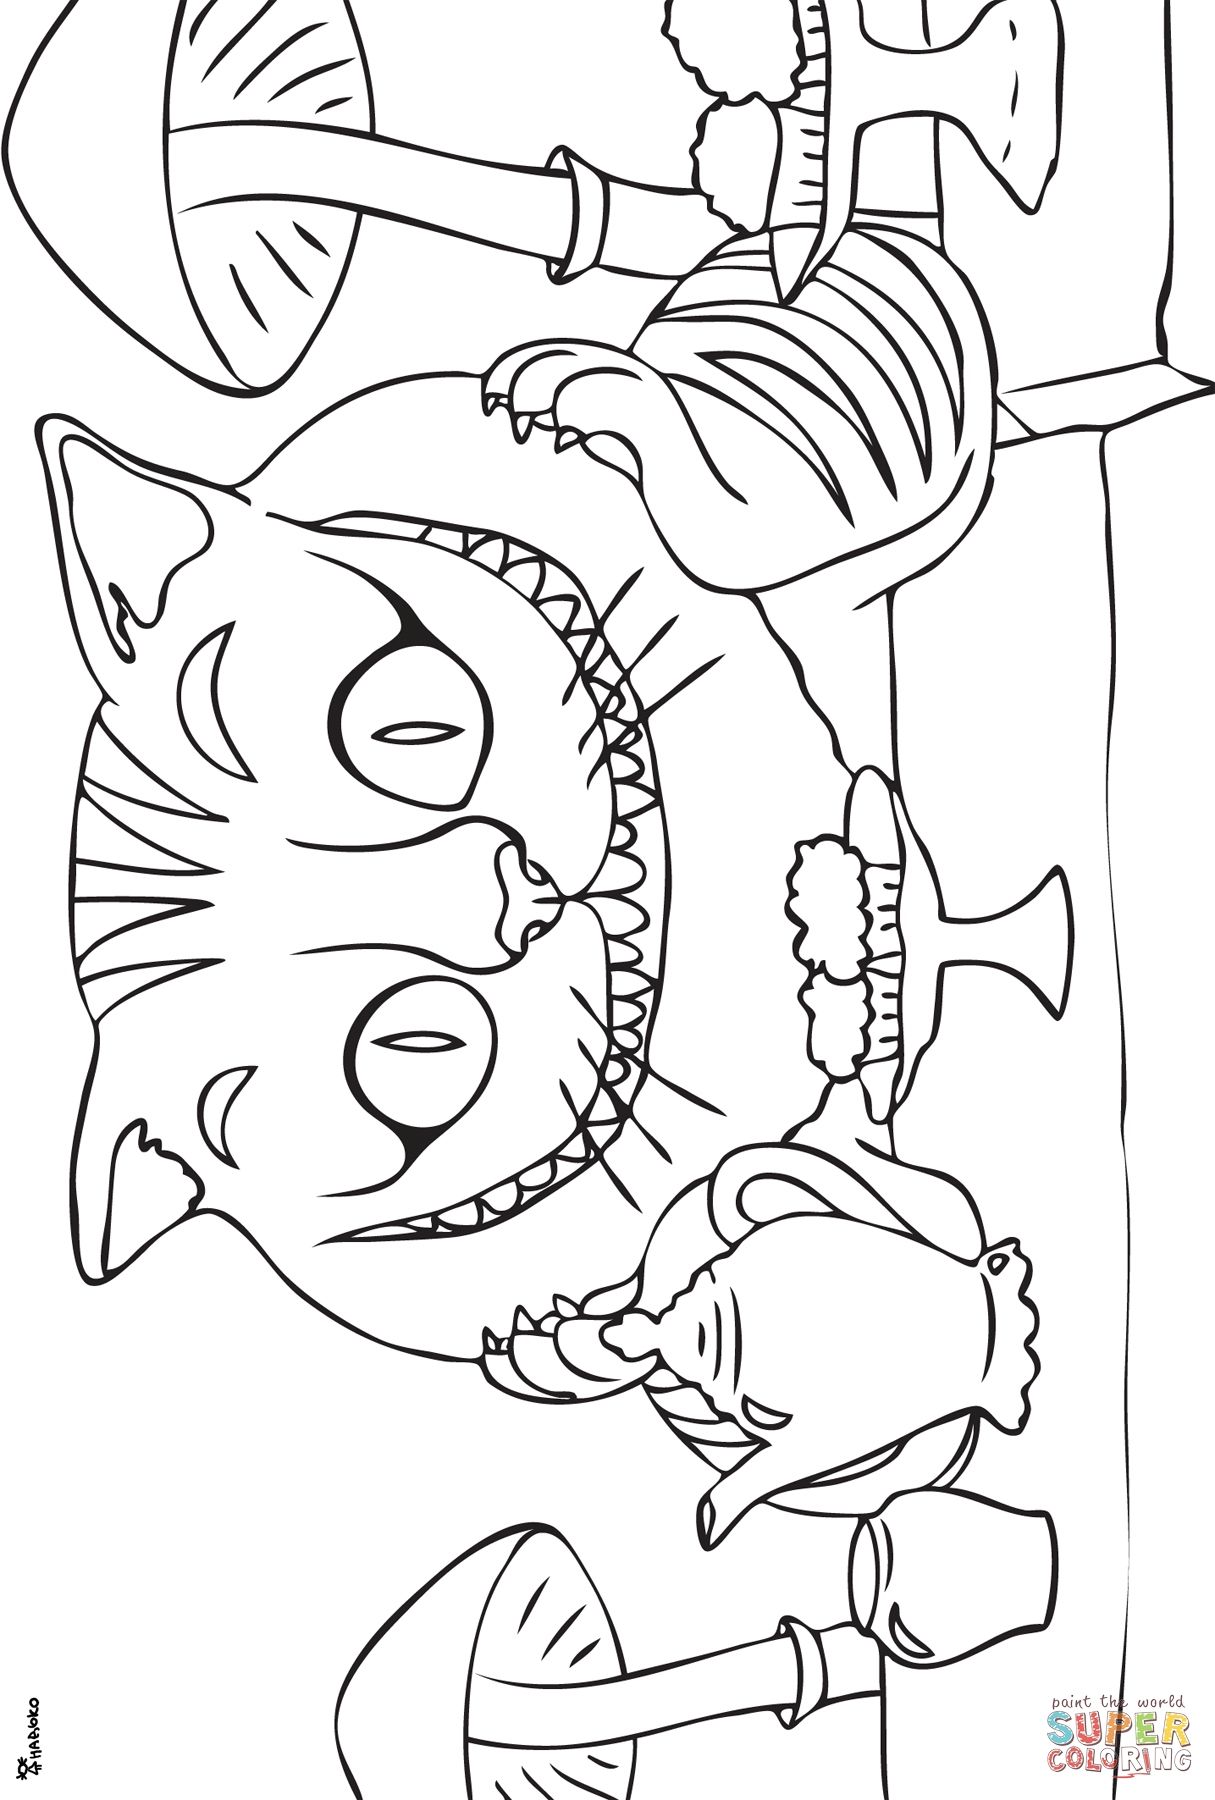 Cheshire cat coloring page free printable coloring pages cat coloring page coloring pages animal coloring pages